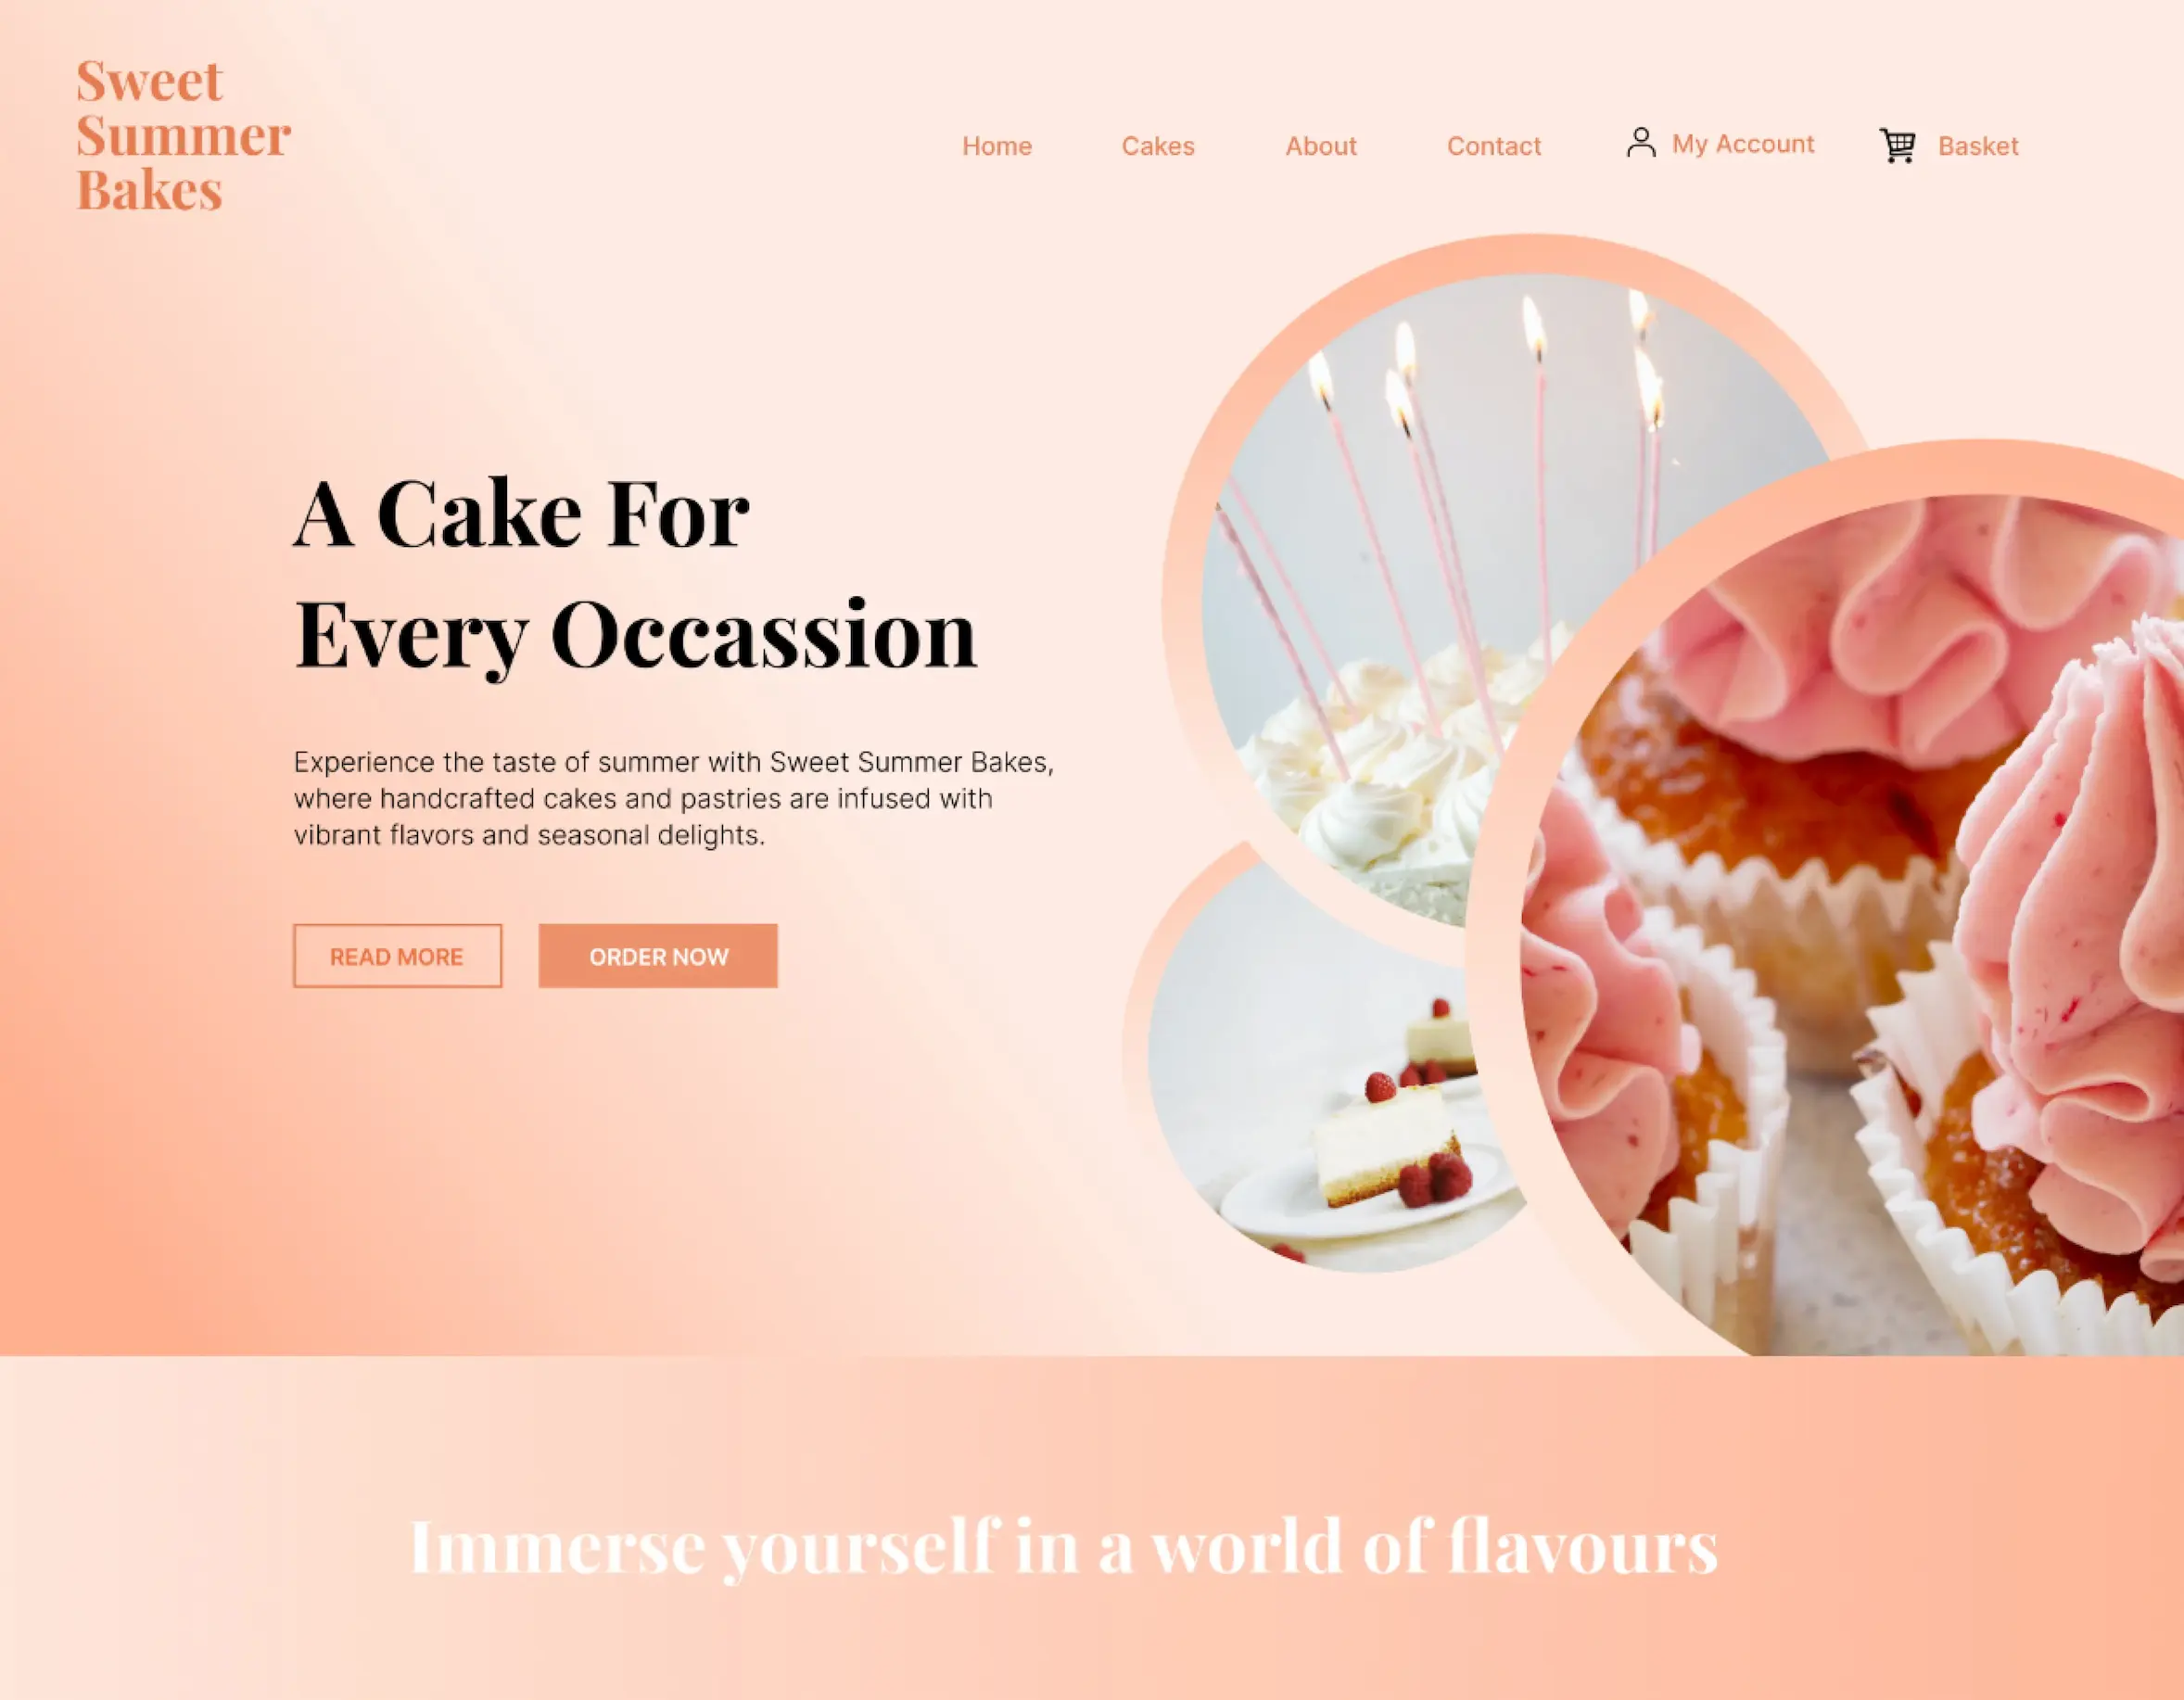 Preview of the Sweet Summer Bakes website